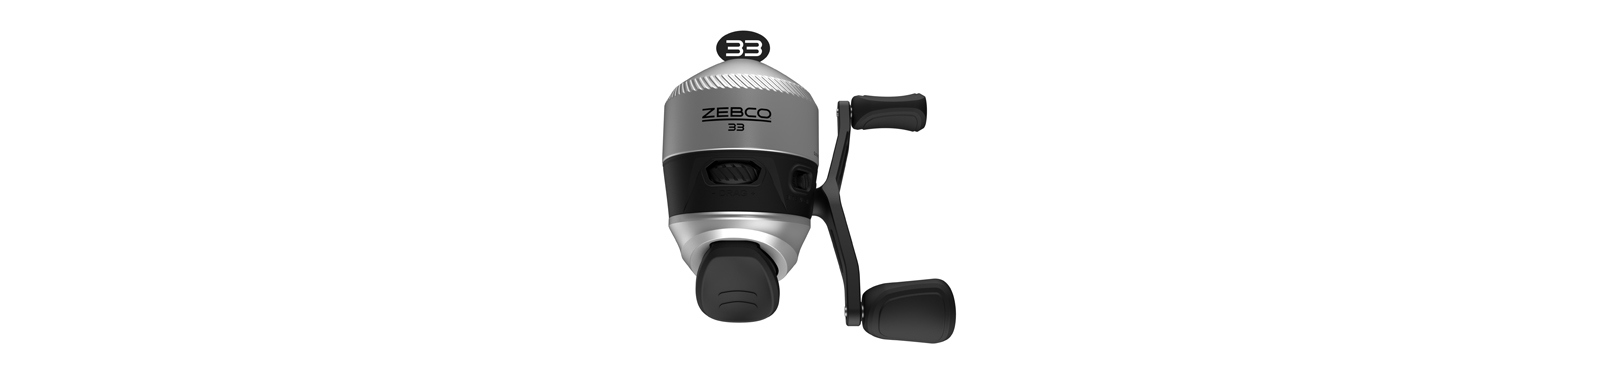 Zebco US76 Spincasting Reel Star Drag and 32 similar items